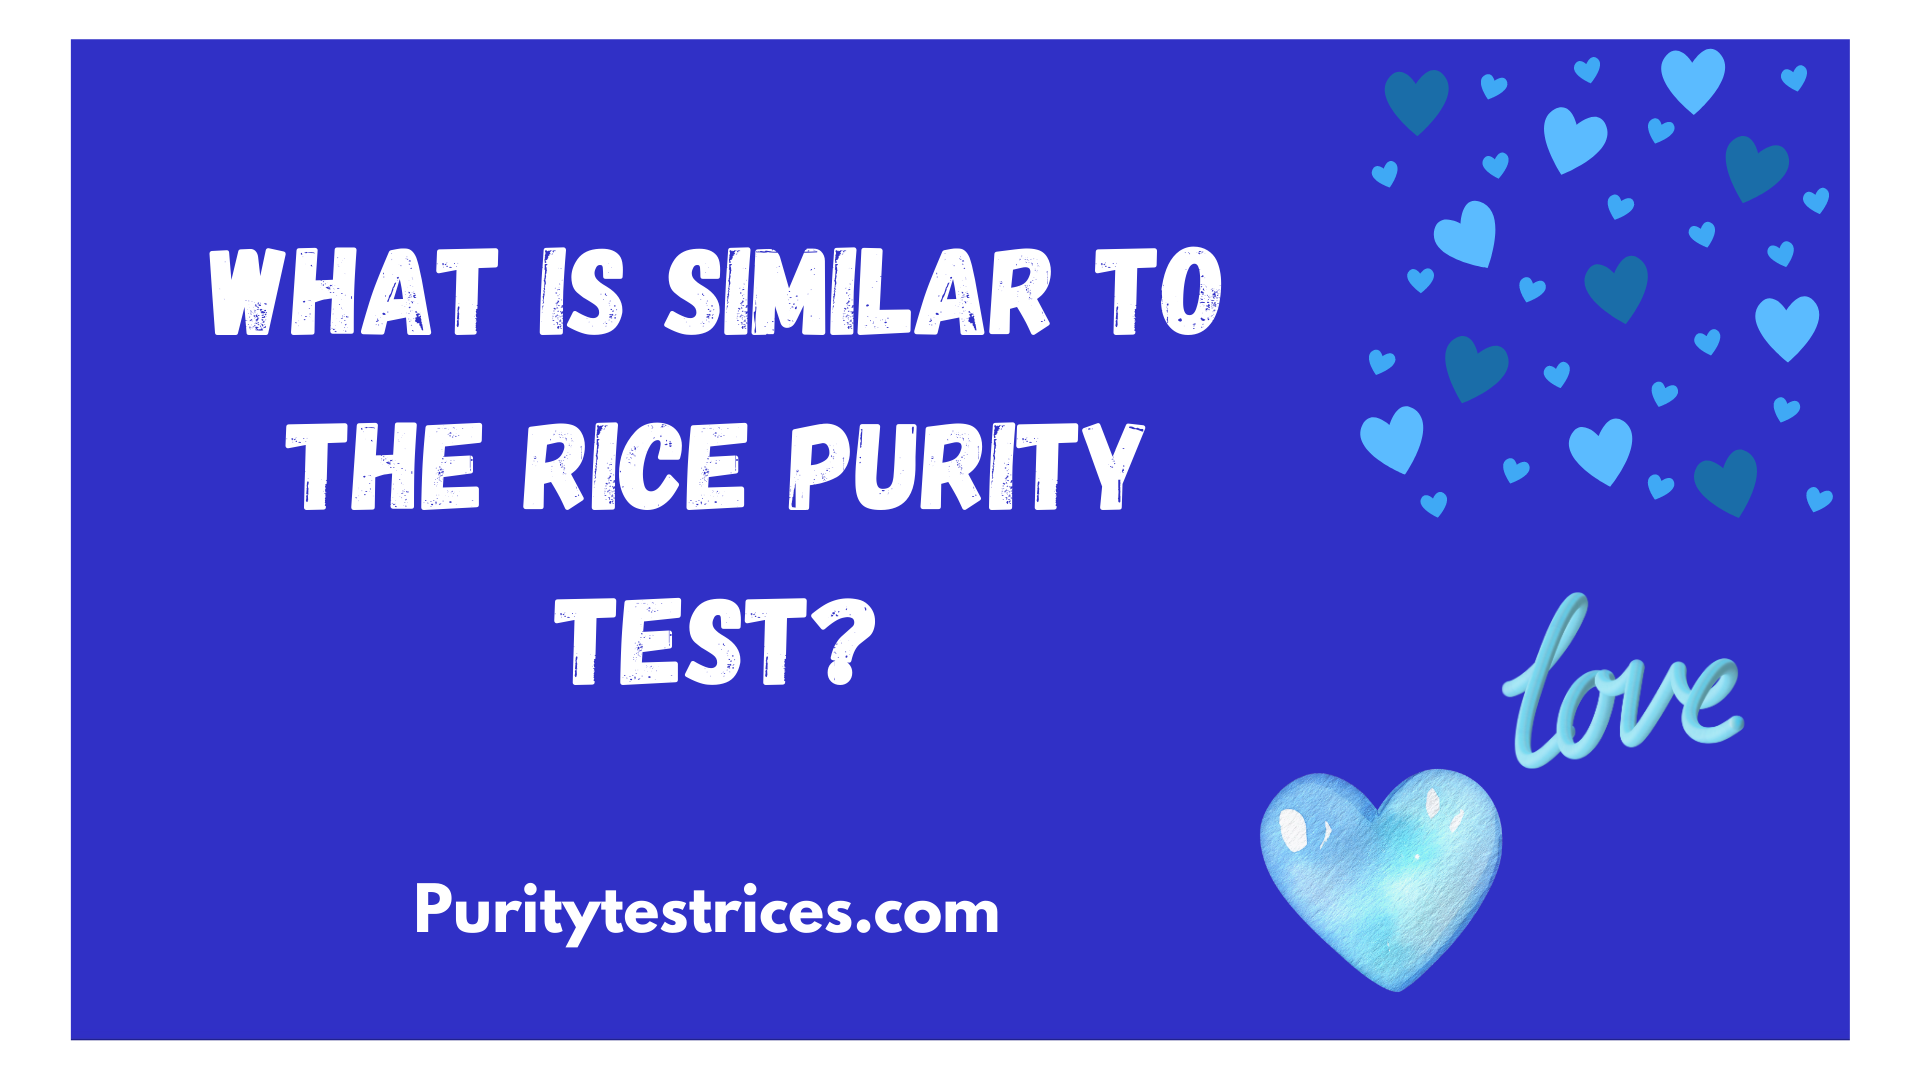 What is similar to the rice purity test?